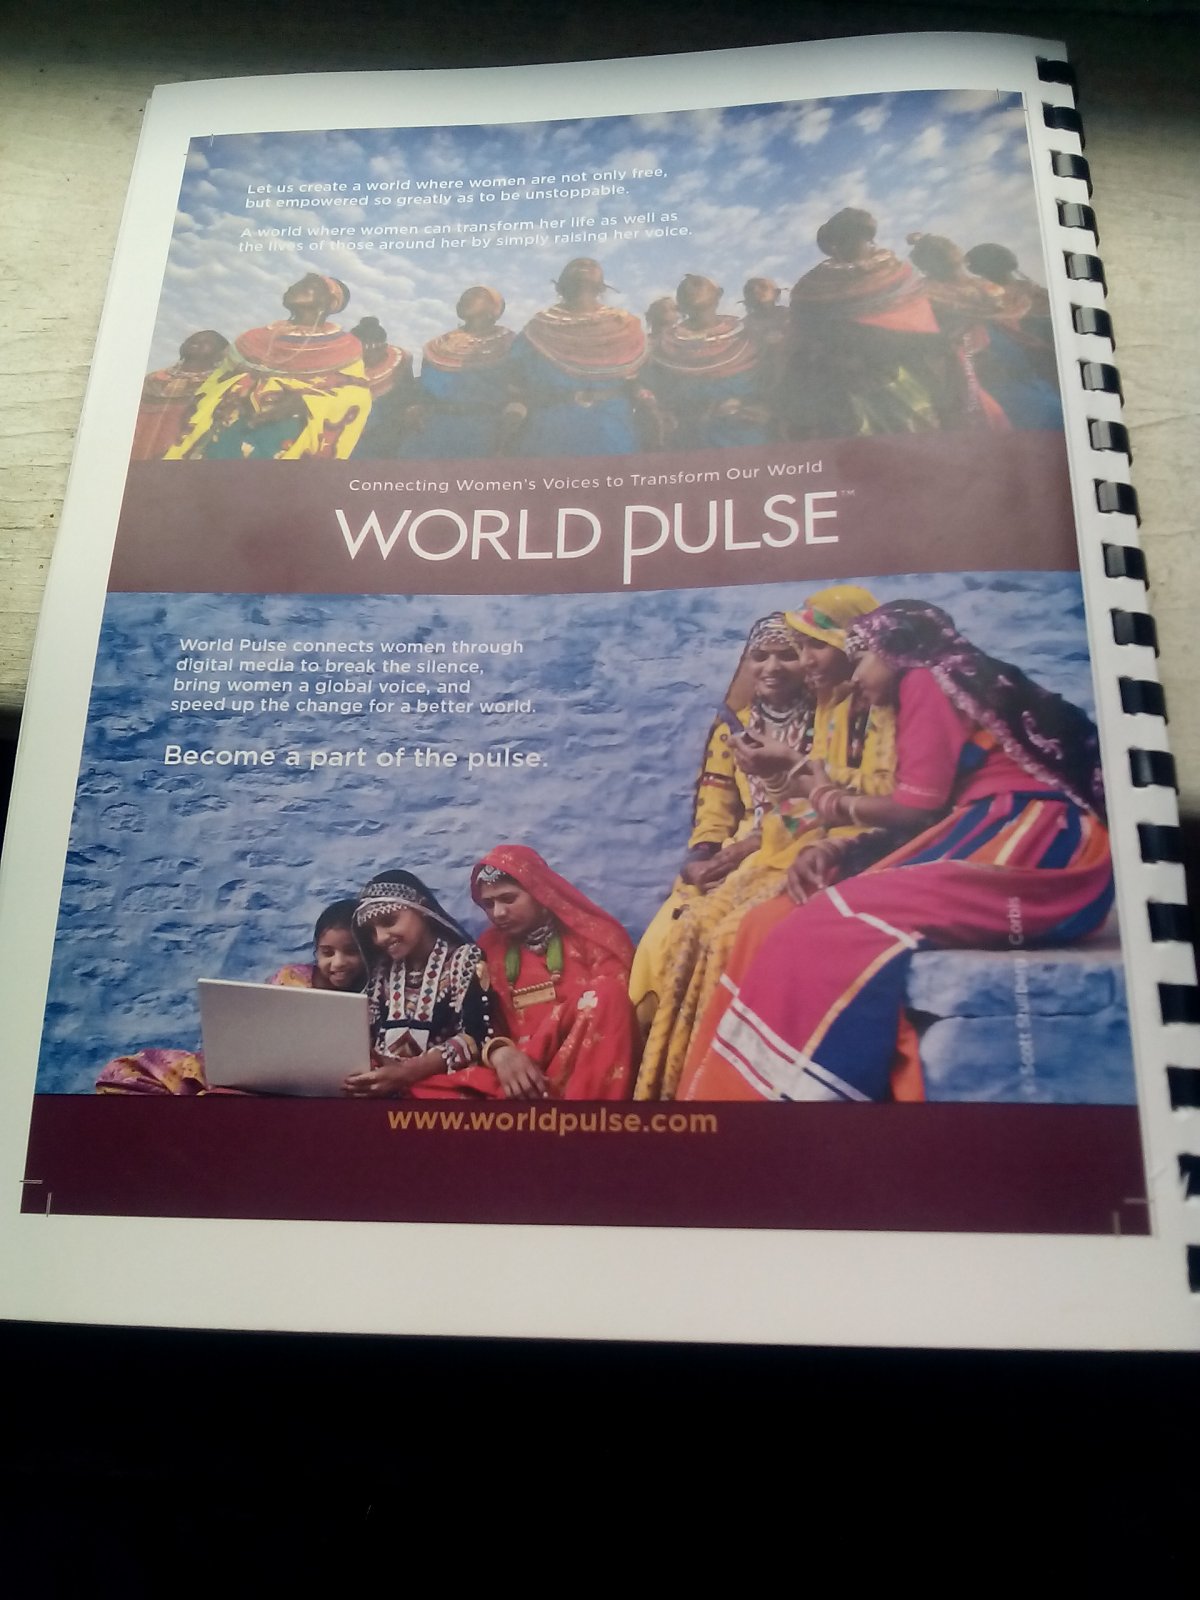 When I flipped the pages of the program booklet and saw World Pulse,I was so overly happy and thought about how blessed I am.